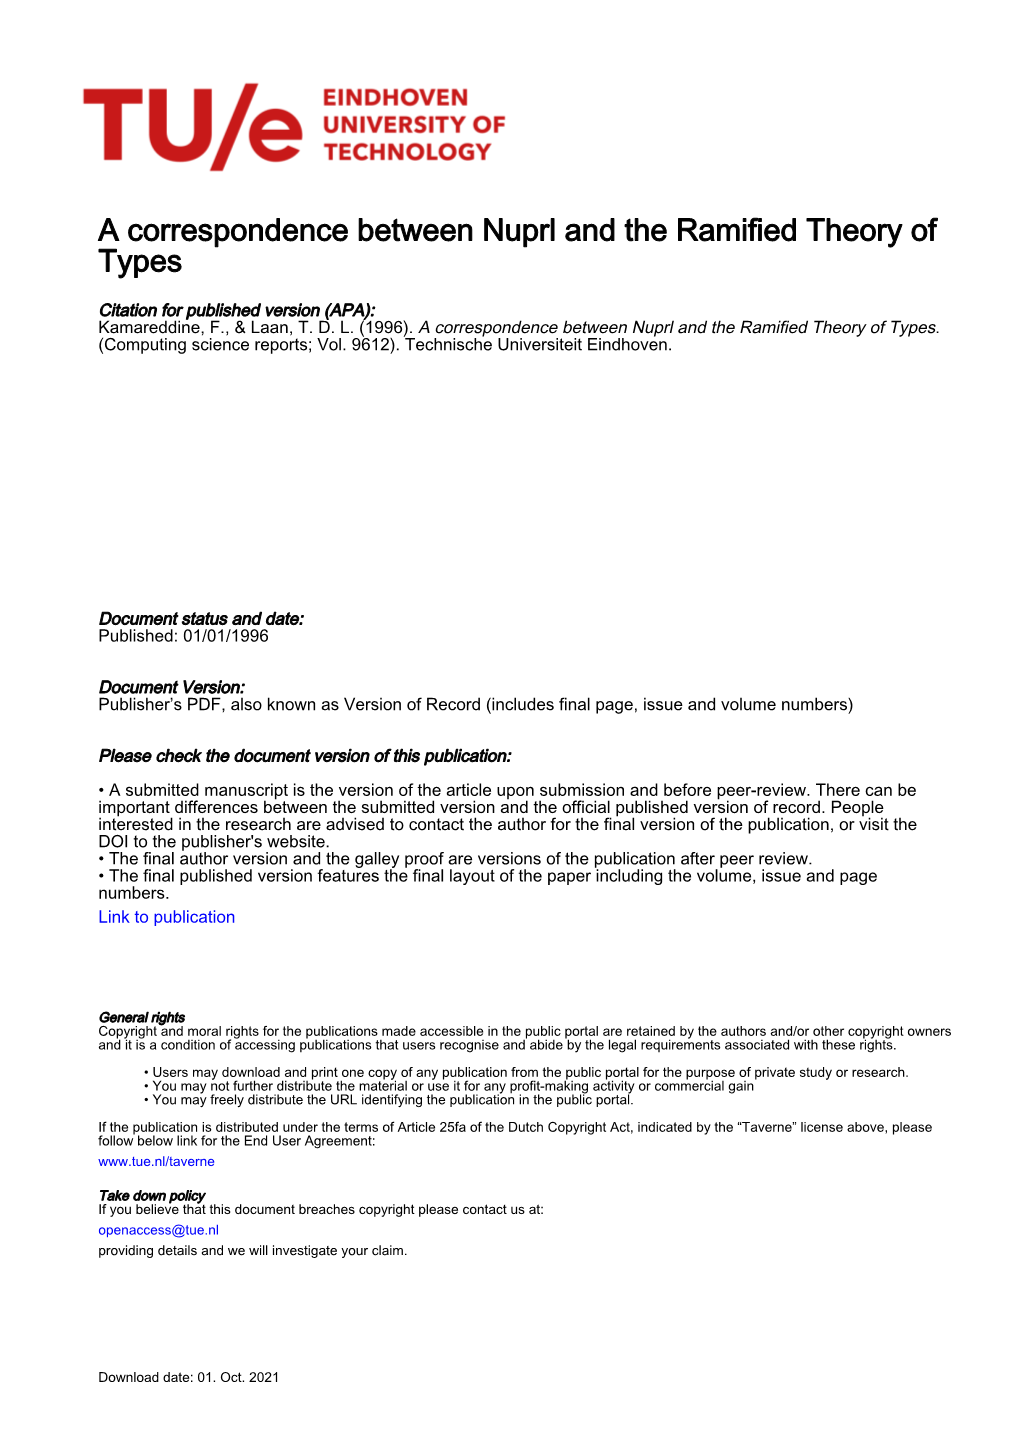 A Correspondence Between Nuprl and the Ramified Theory of Types